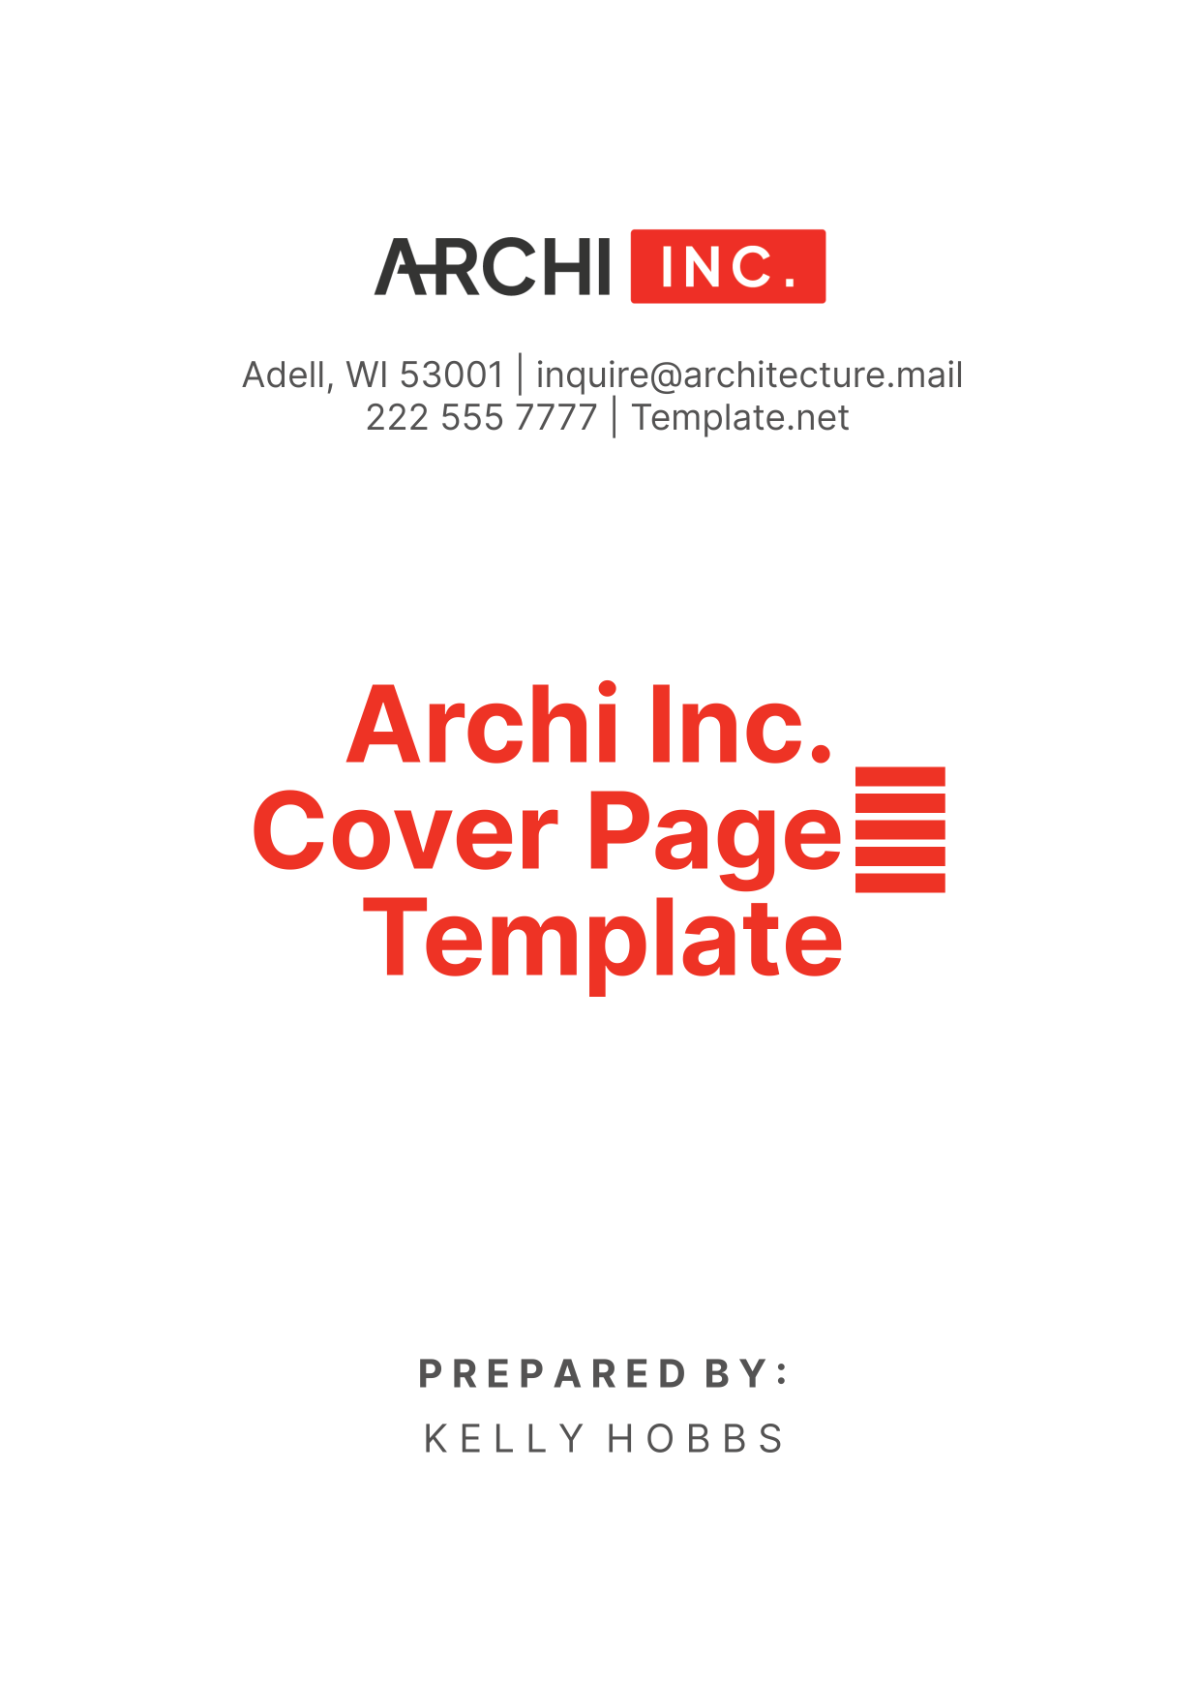 Architecture Cover Page